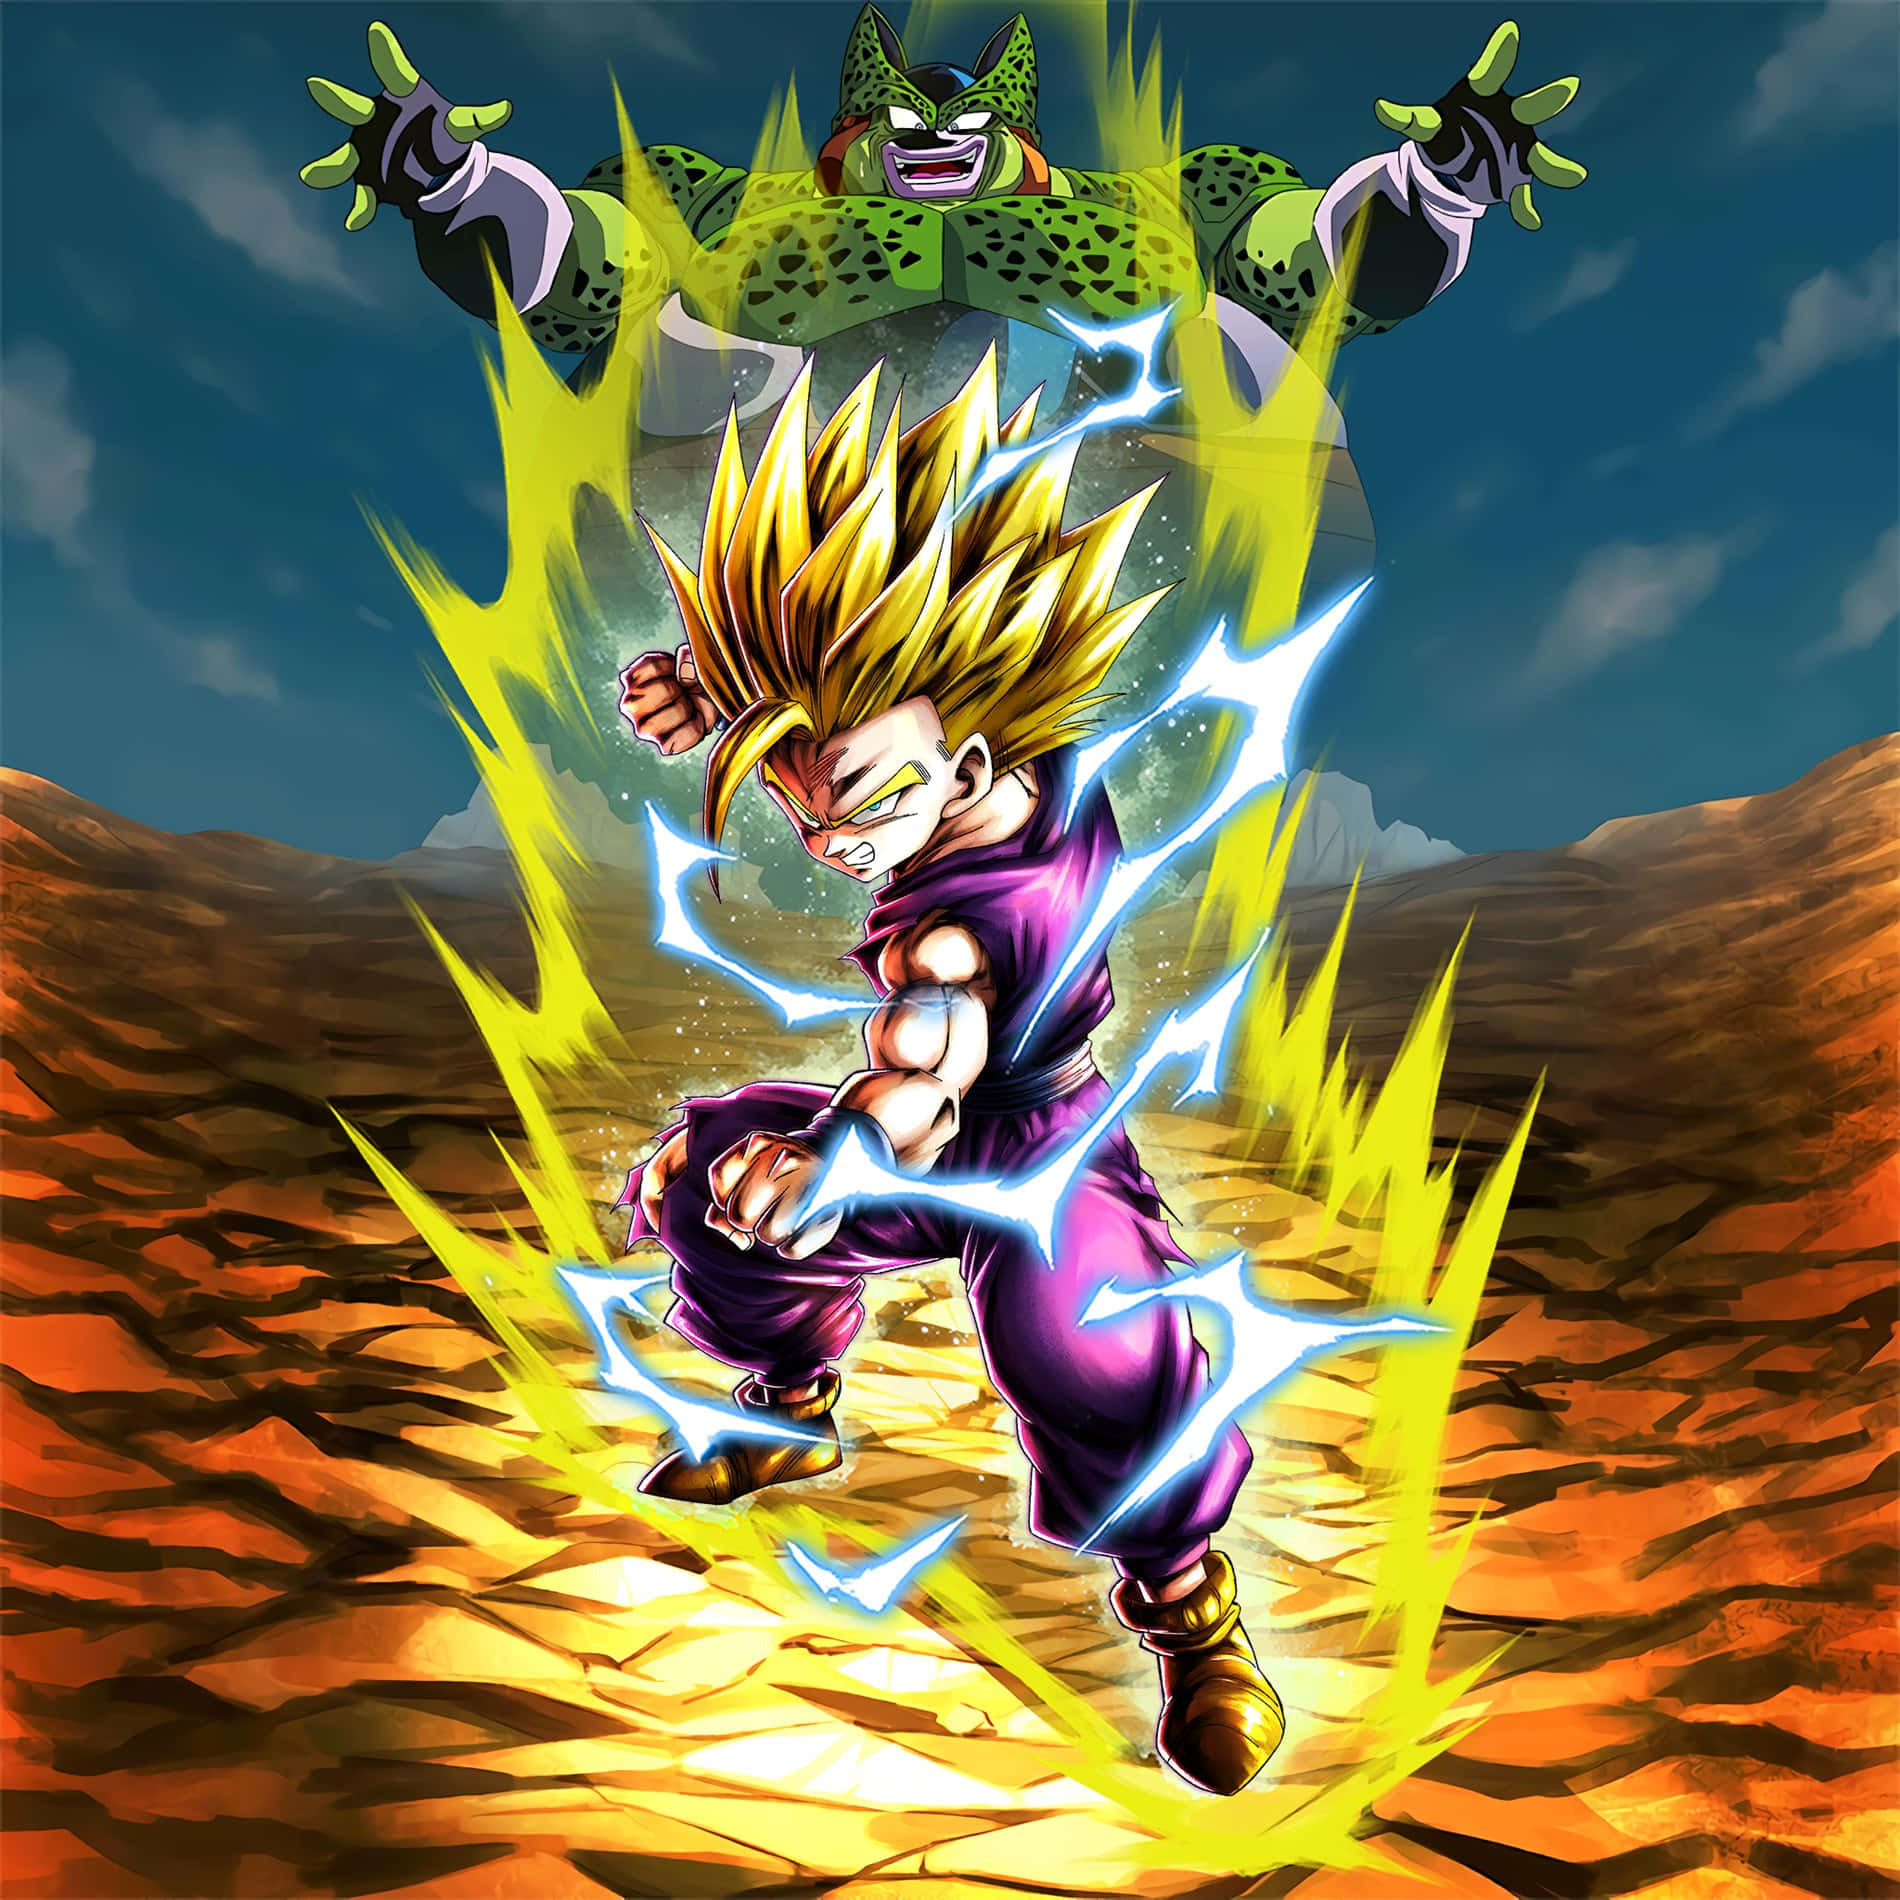 Teen Gohan Vowing to Defend His Protocol Wallpaper